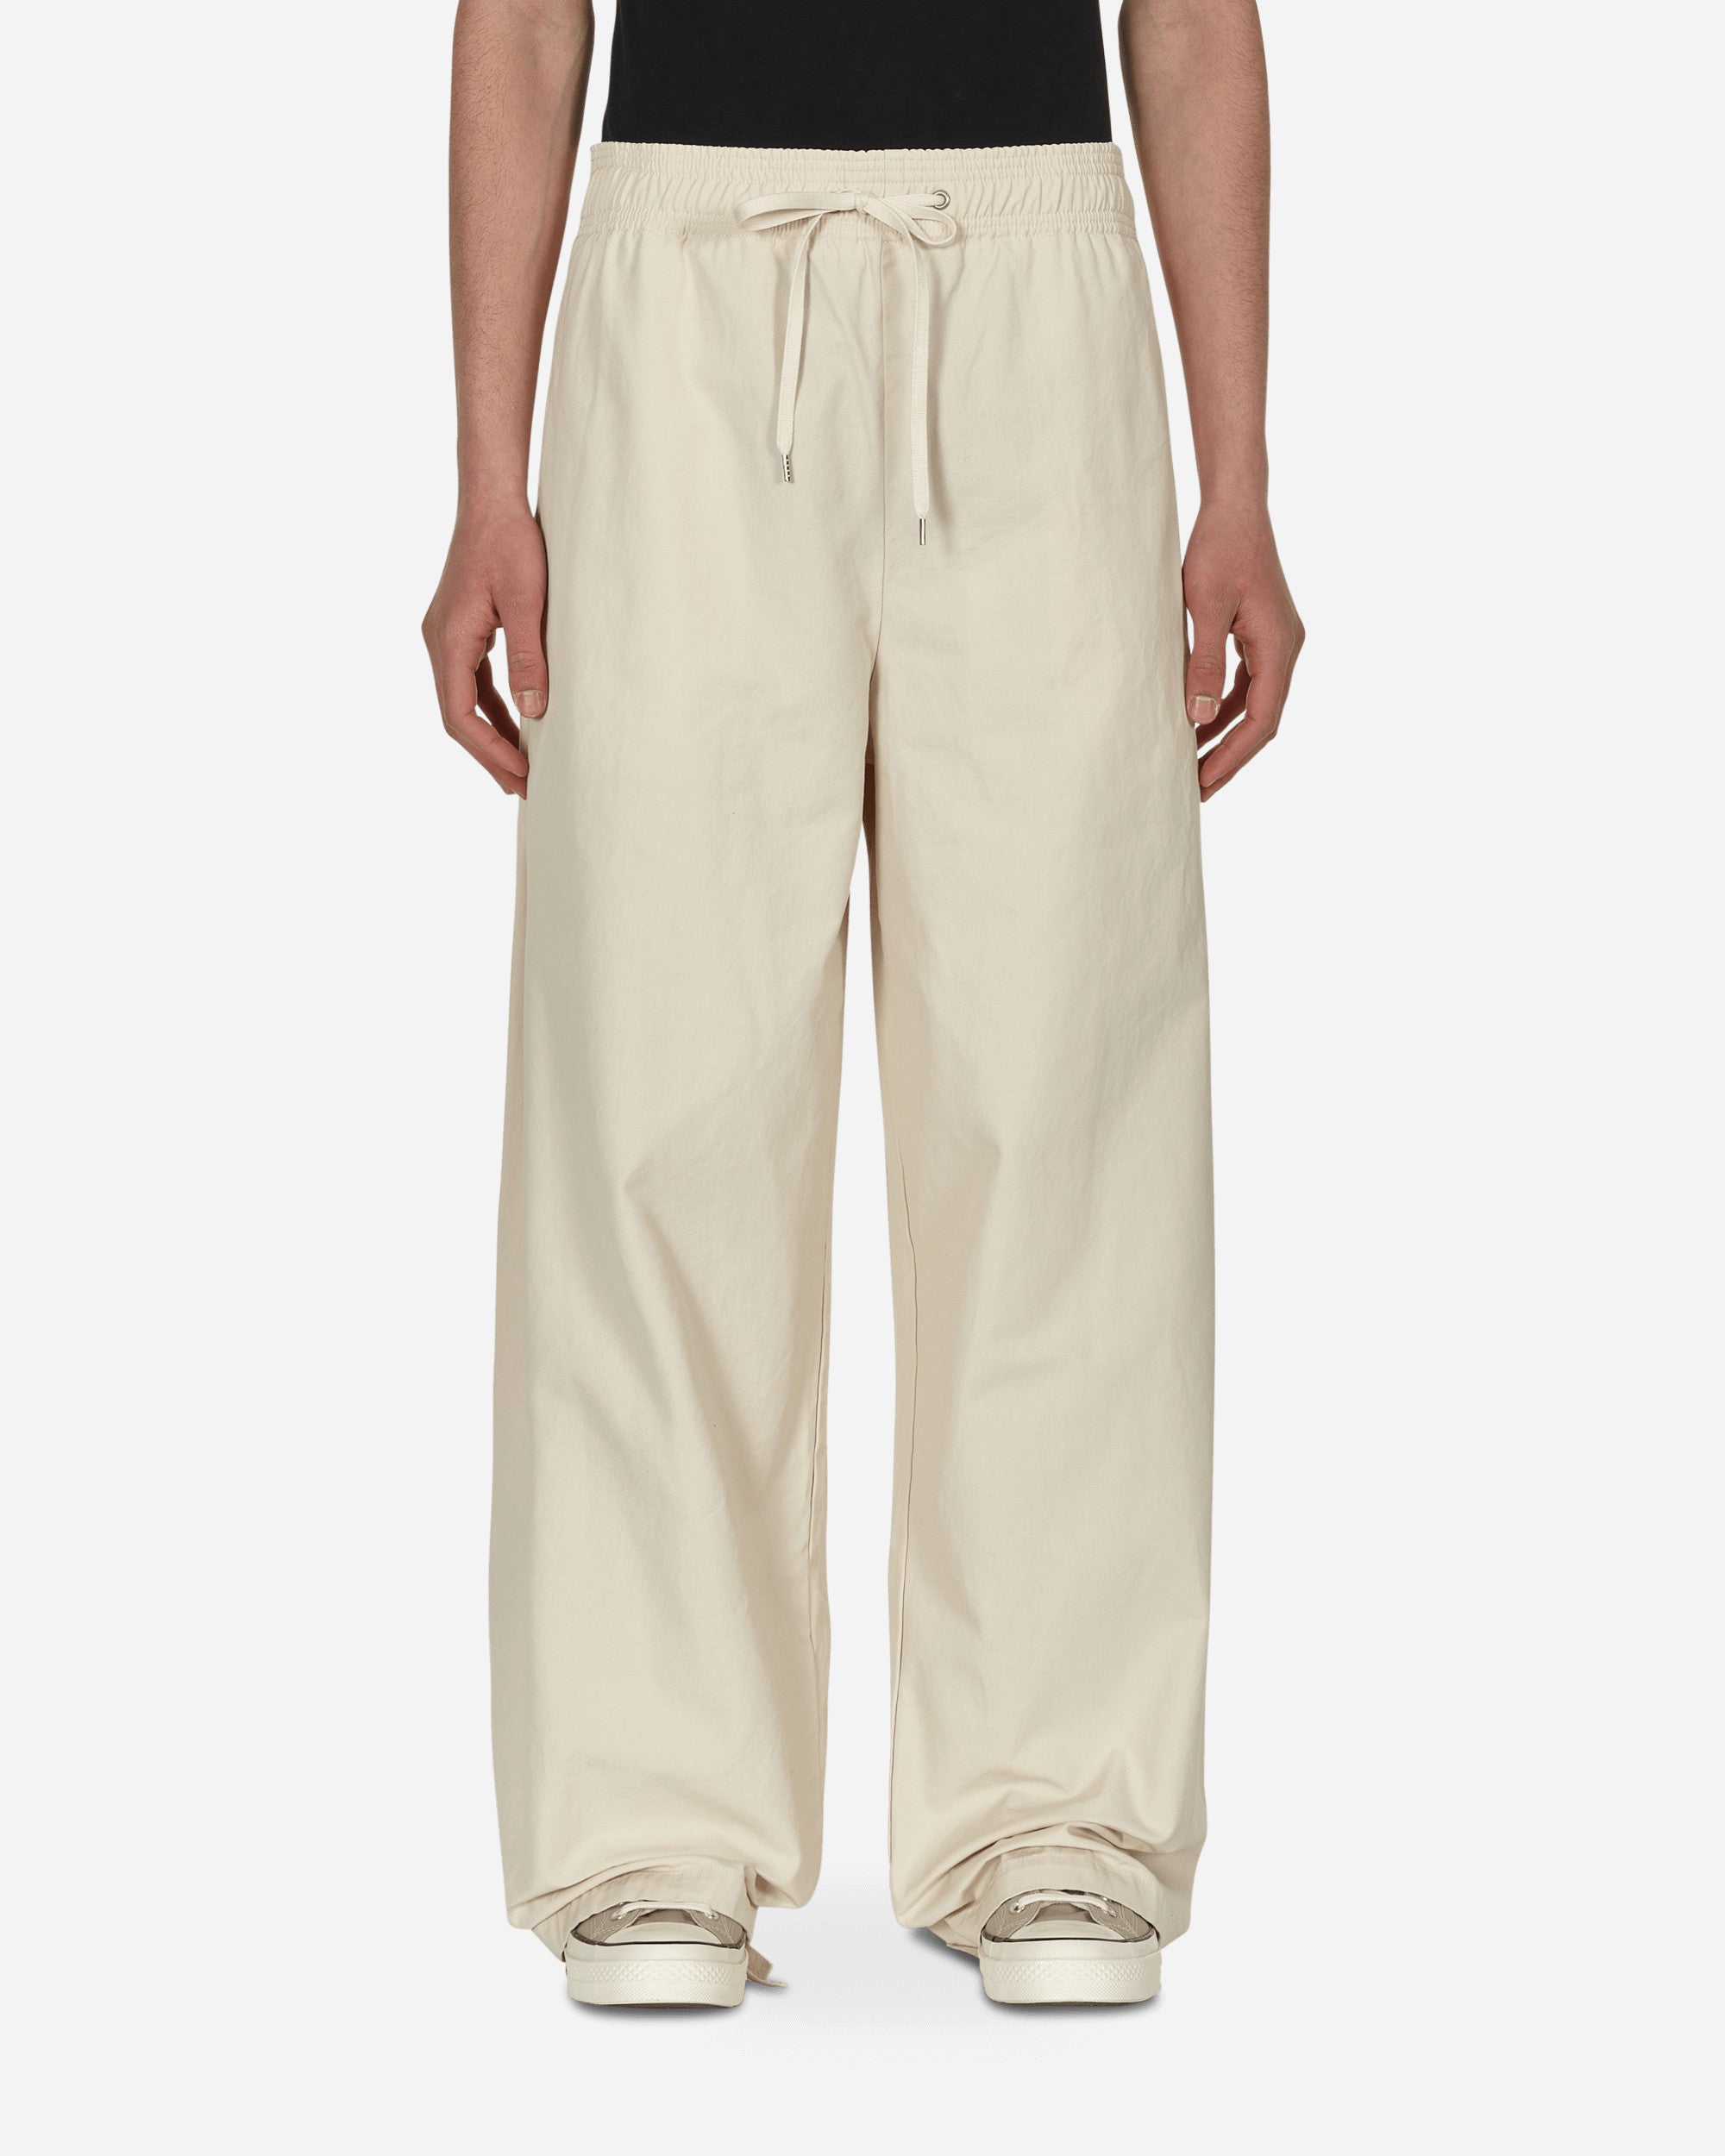 Instrumental No Side Seam Easy Wide Pants White Pants Trousers I07PT011 WHITE